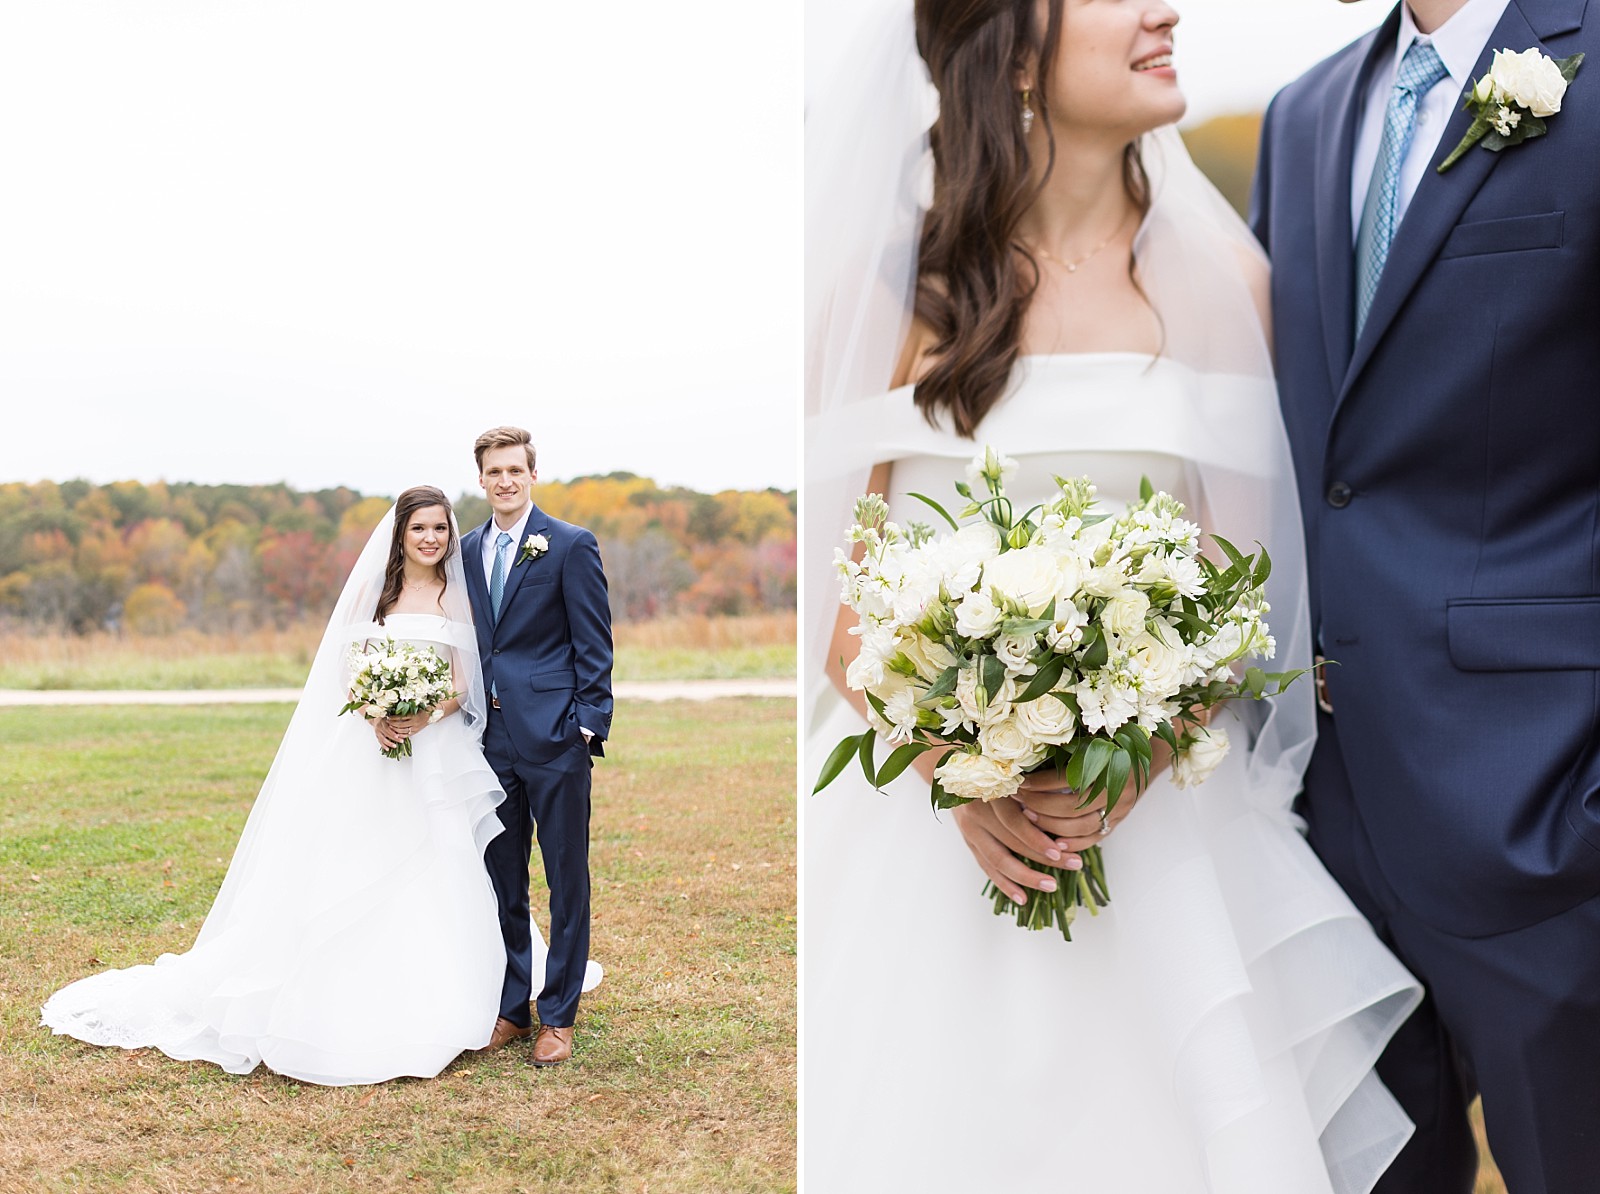 Bride and groom outside and details of wedding flowers | Fall Wedding at The Meadows in Raleigh | Raleigh NC Wedding Photographer